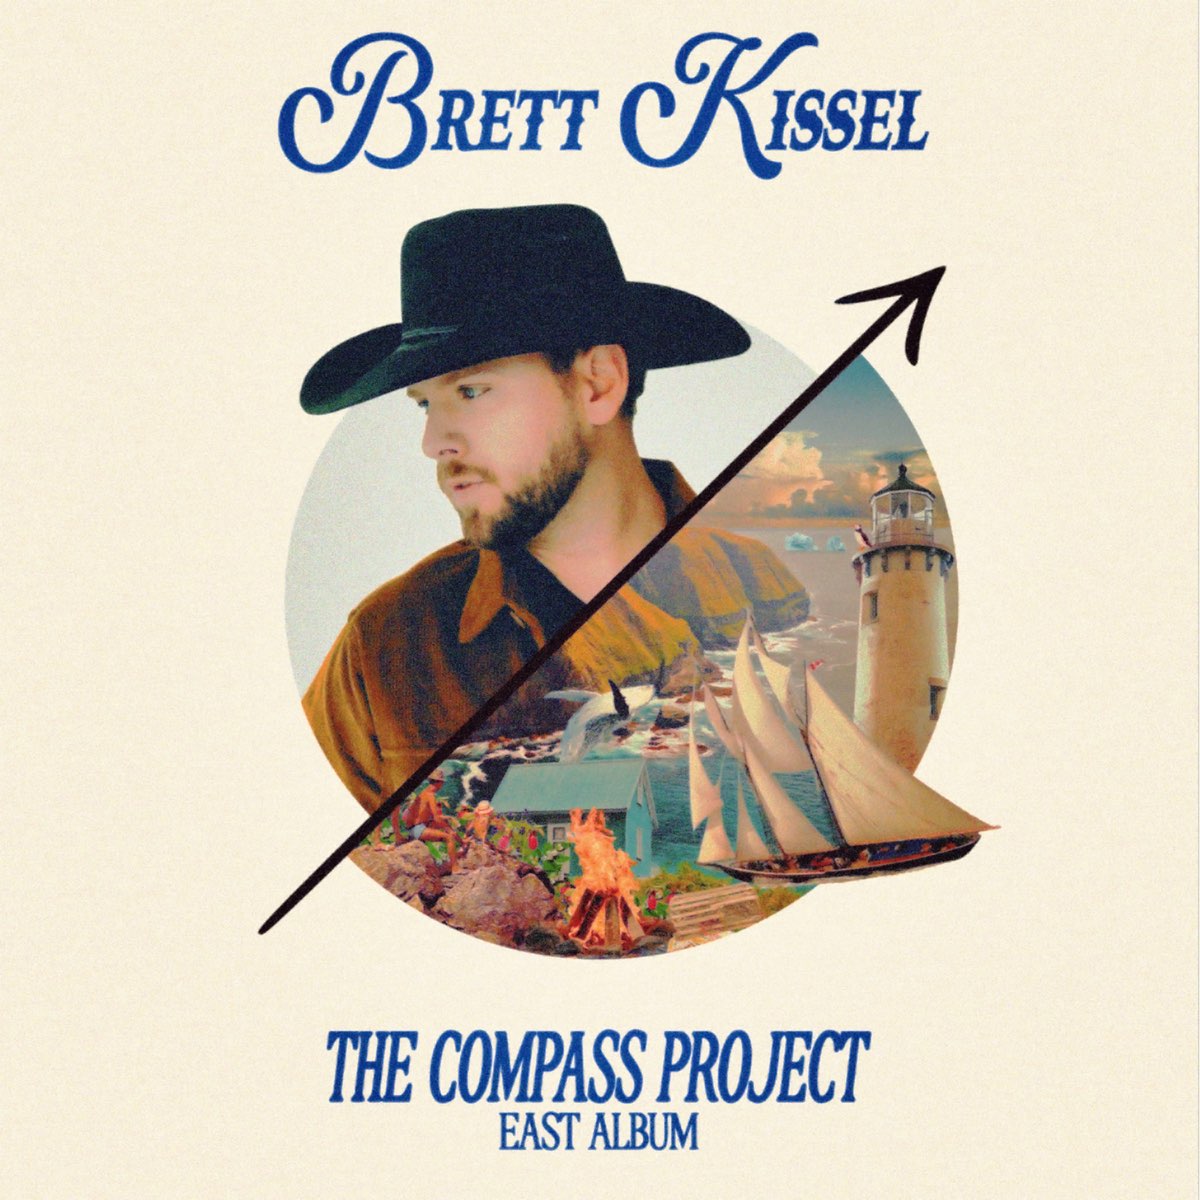 ‎the Compass Project East Album By Brett Kissel On Apple Music 